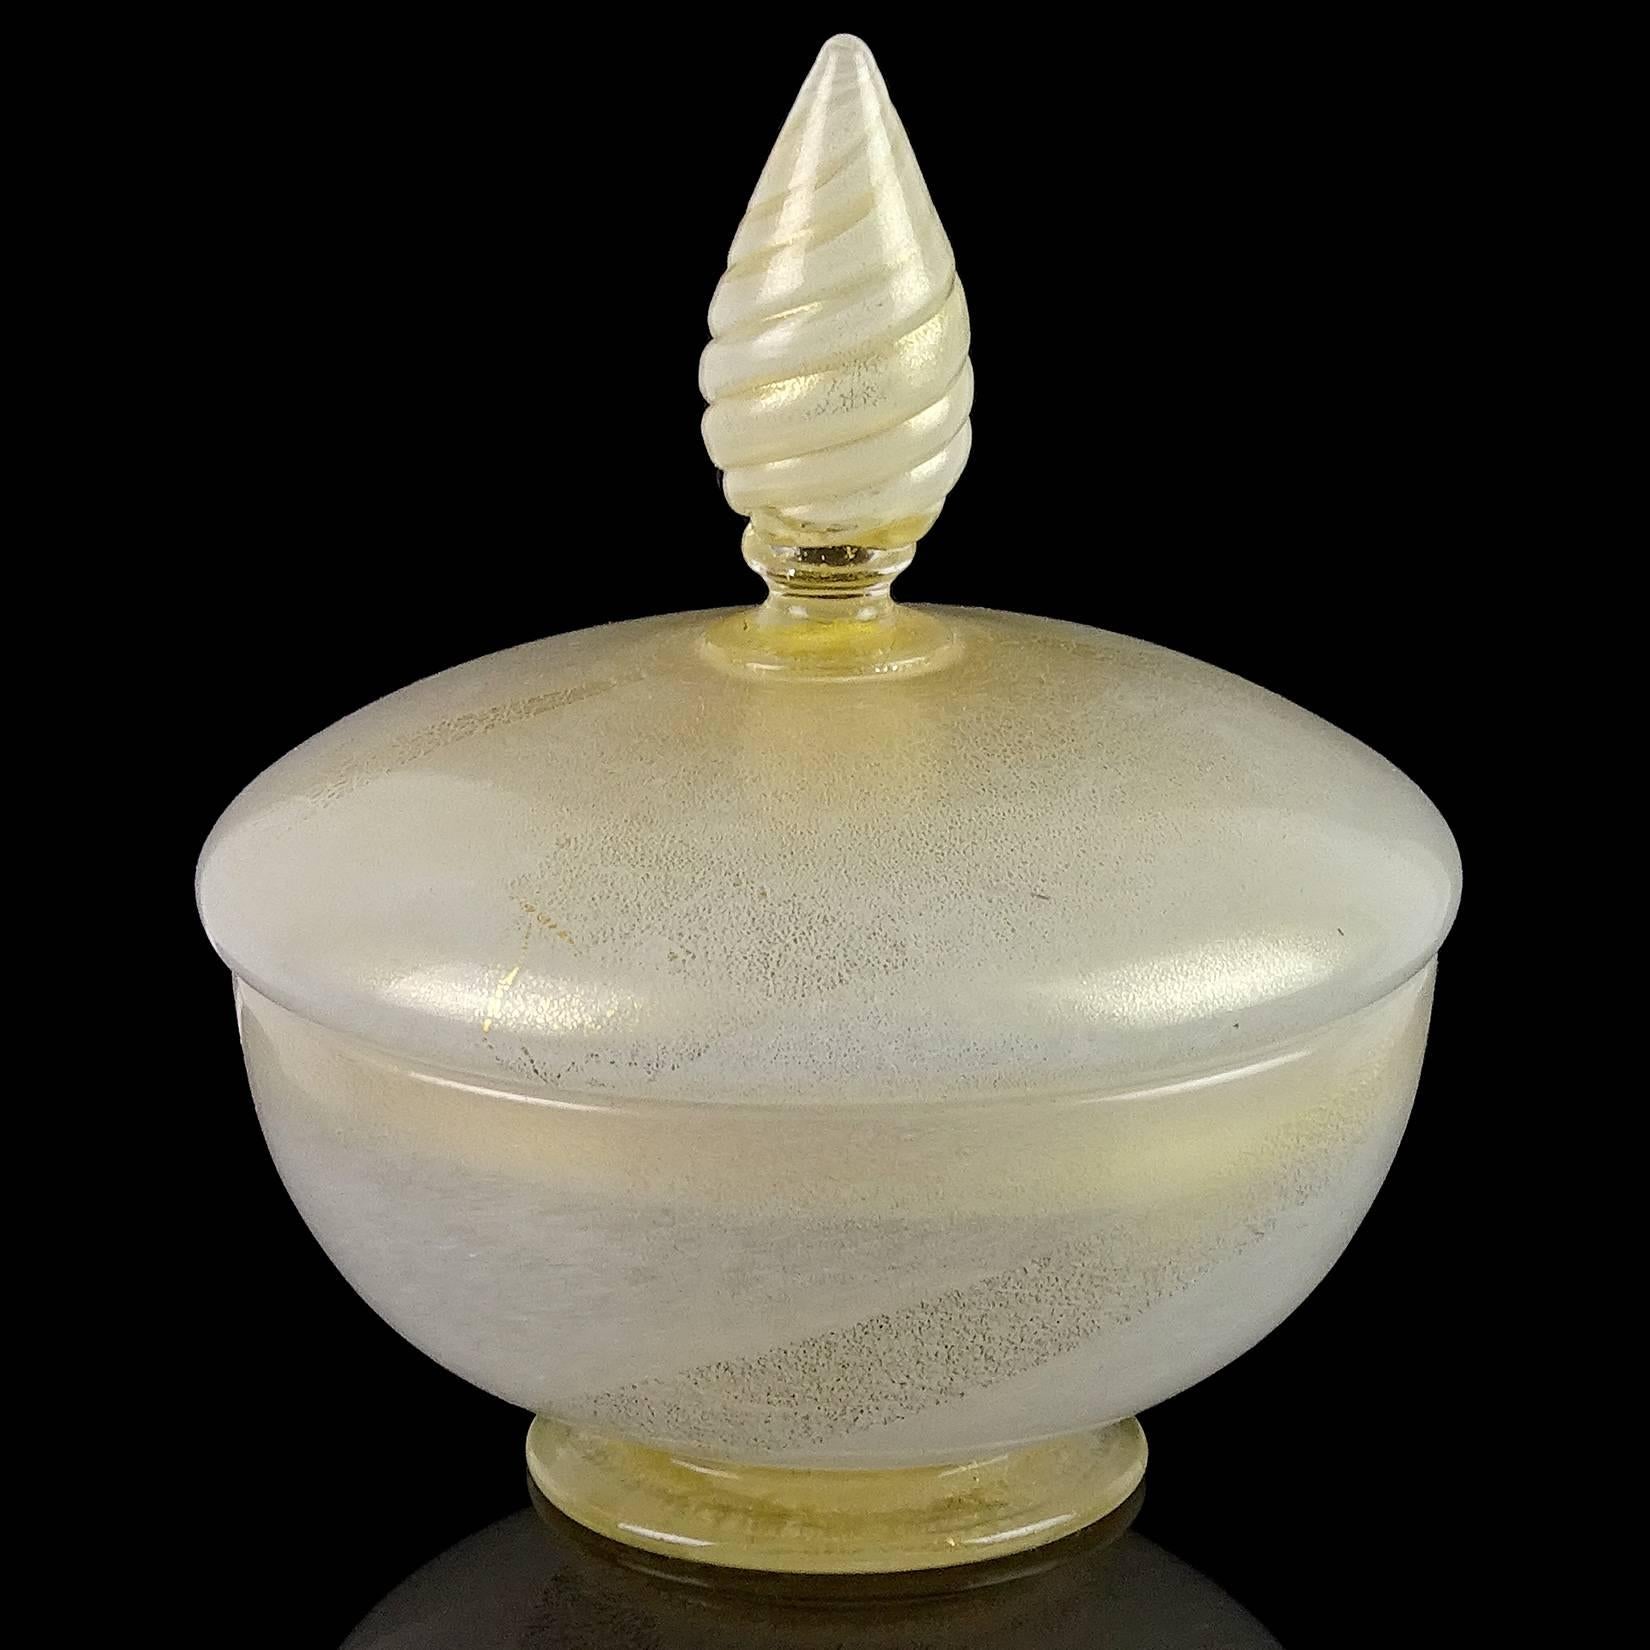 Elegant Murano hand blown white and gold flecks Italian art glass vanity powder / jewelry box. Documented to the Barovier e Toso company. Created with small dots of white pigments and profusely covered in gold leaf. Measures 6” high x 5” across.
